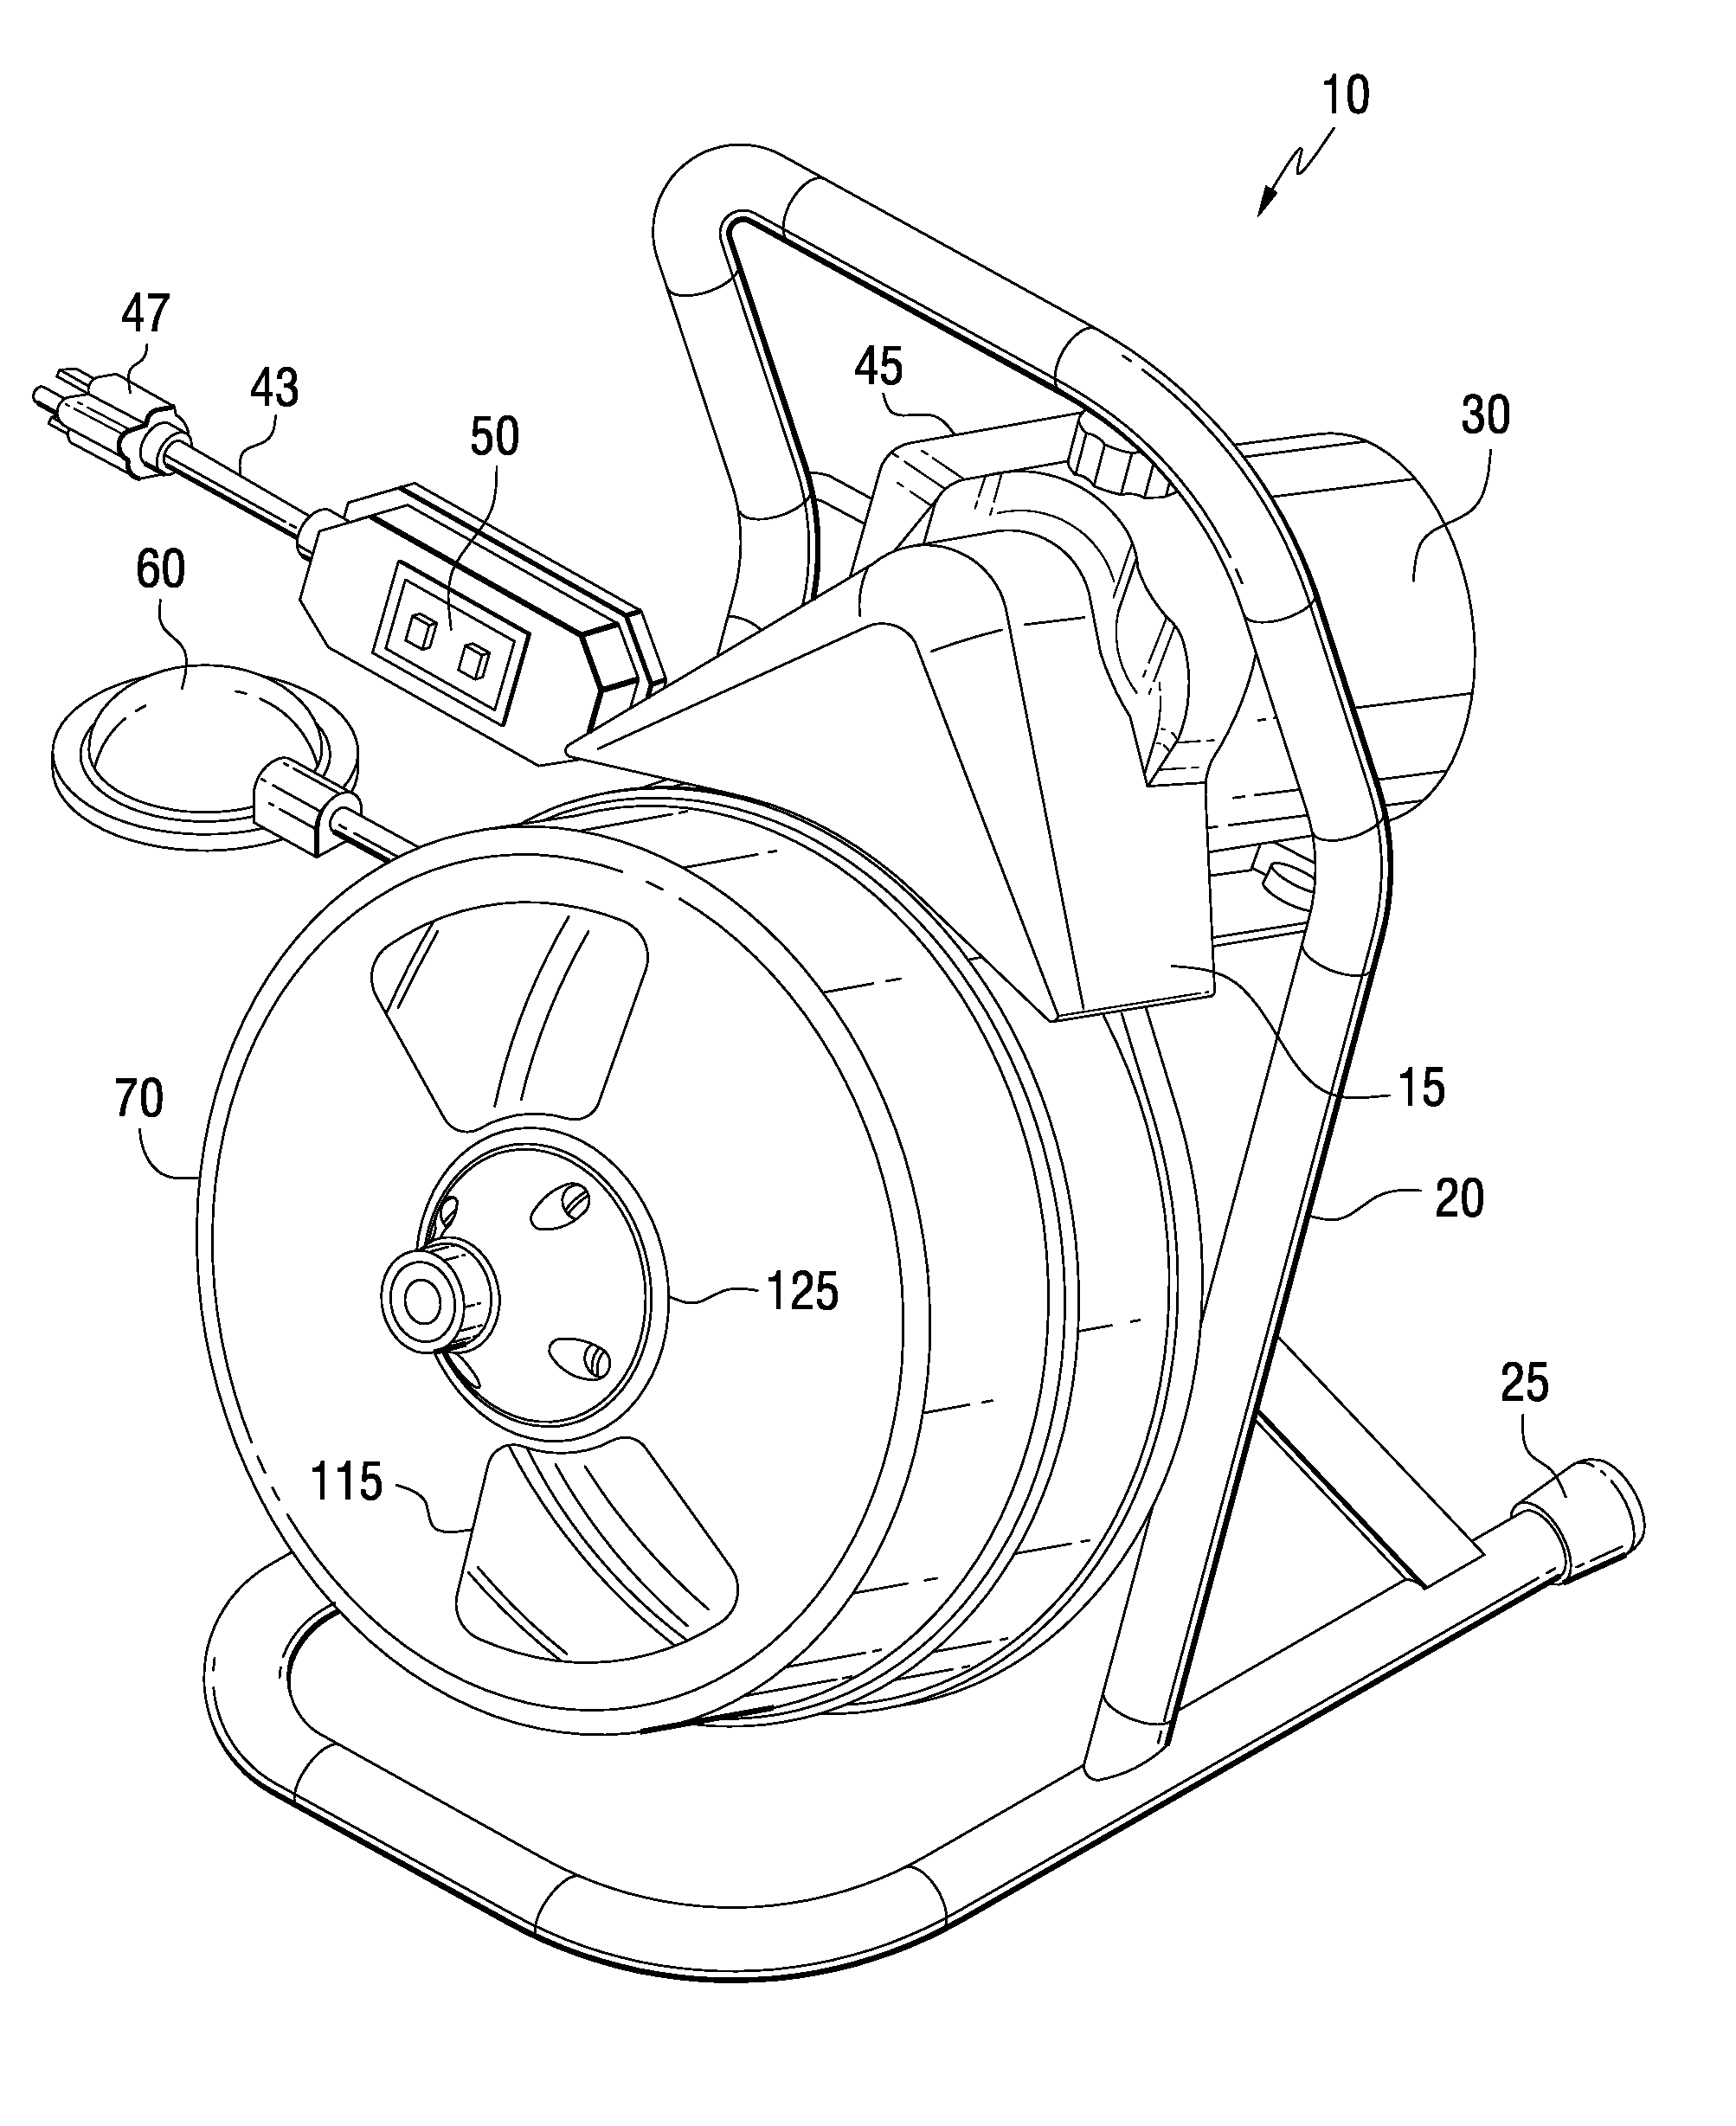 Drain cleaning apparatus with restricted reverse function